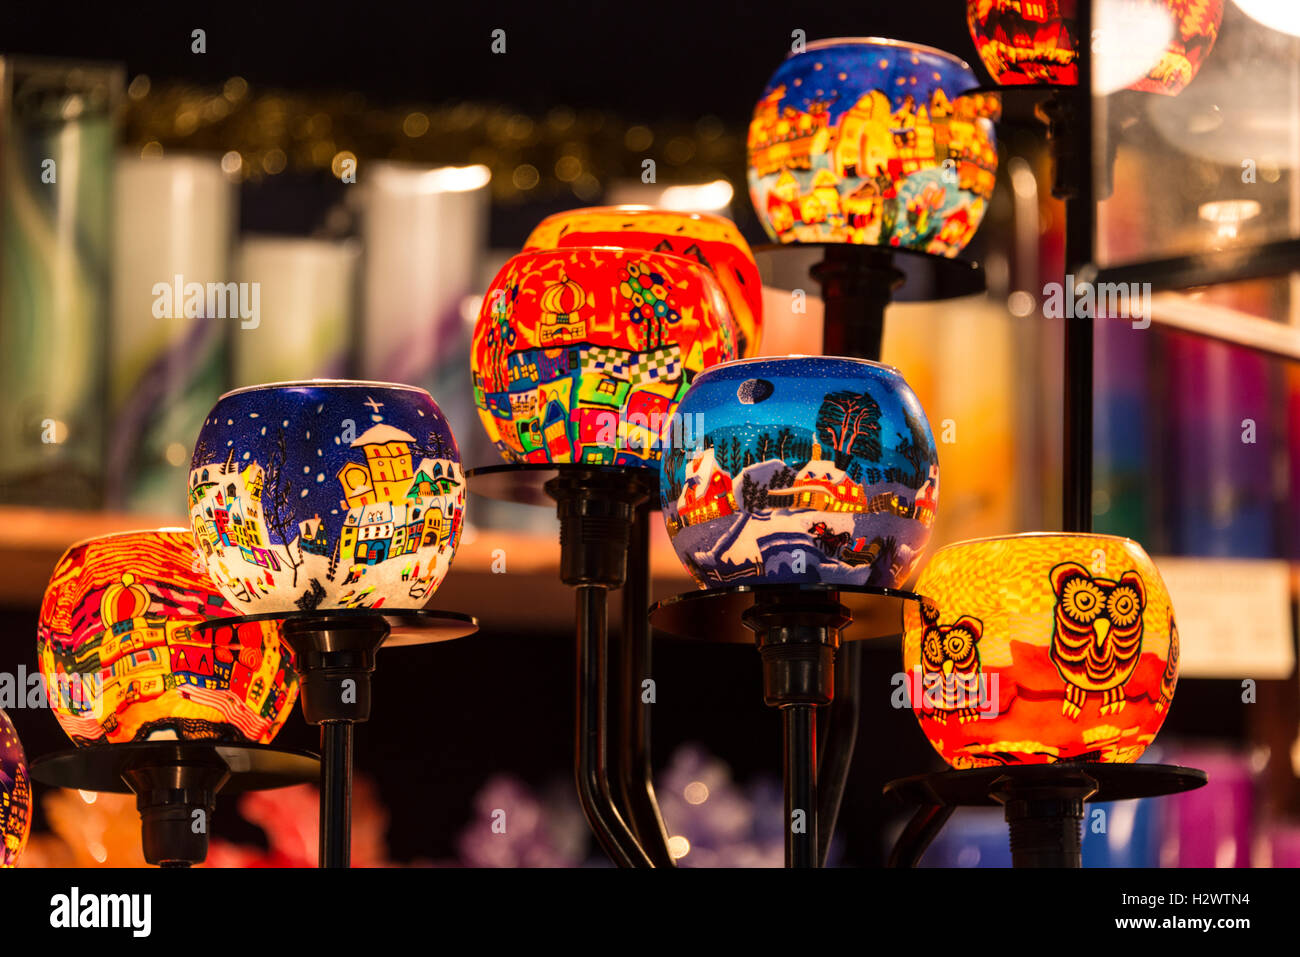 Handmade painted glass Christmas bauble candles on sale at the  Nuremberg Christmas market in Nuremberg, Germany. Stock Photo